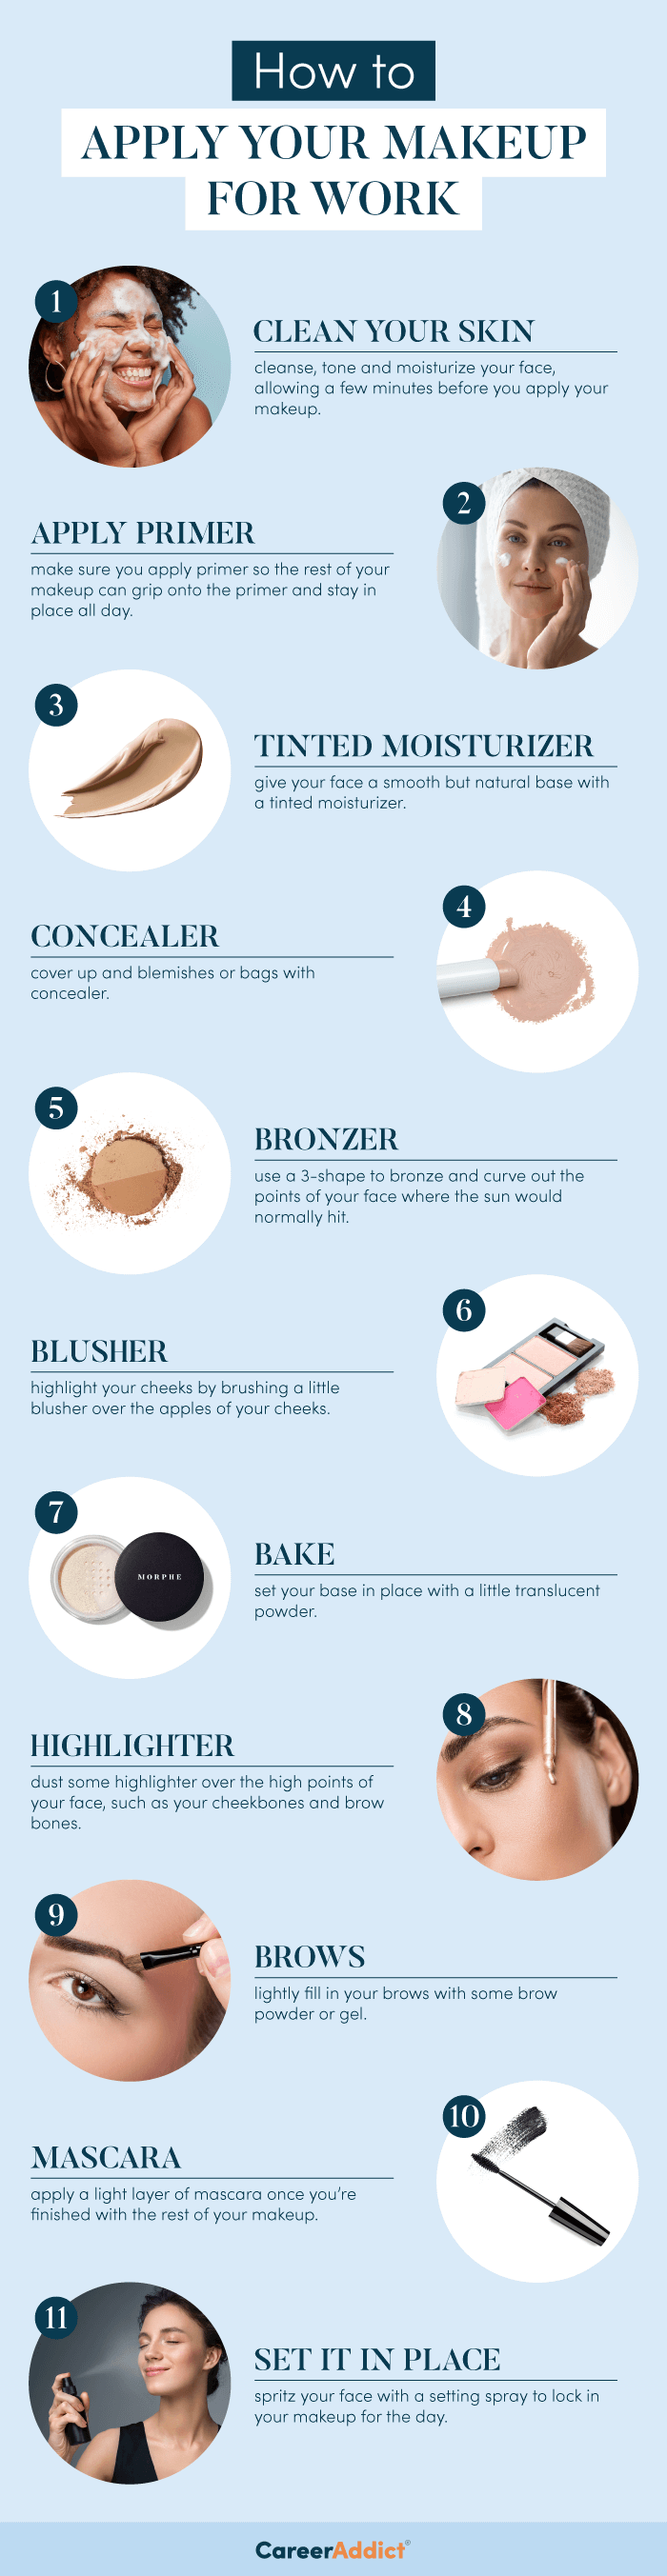 How to Perfect Your Work Makeup: A Complete Guide